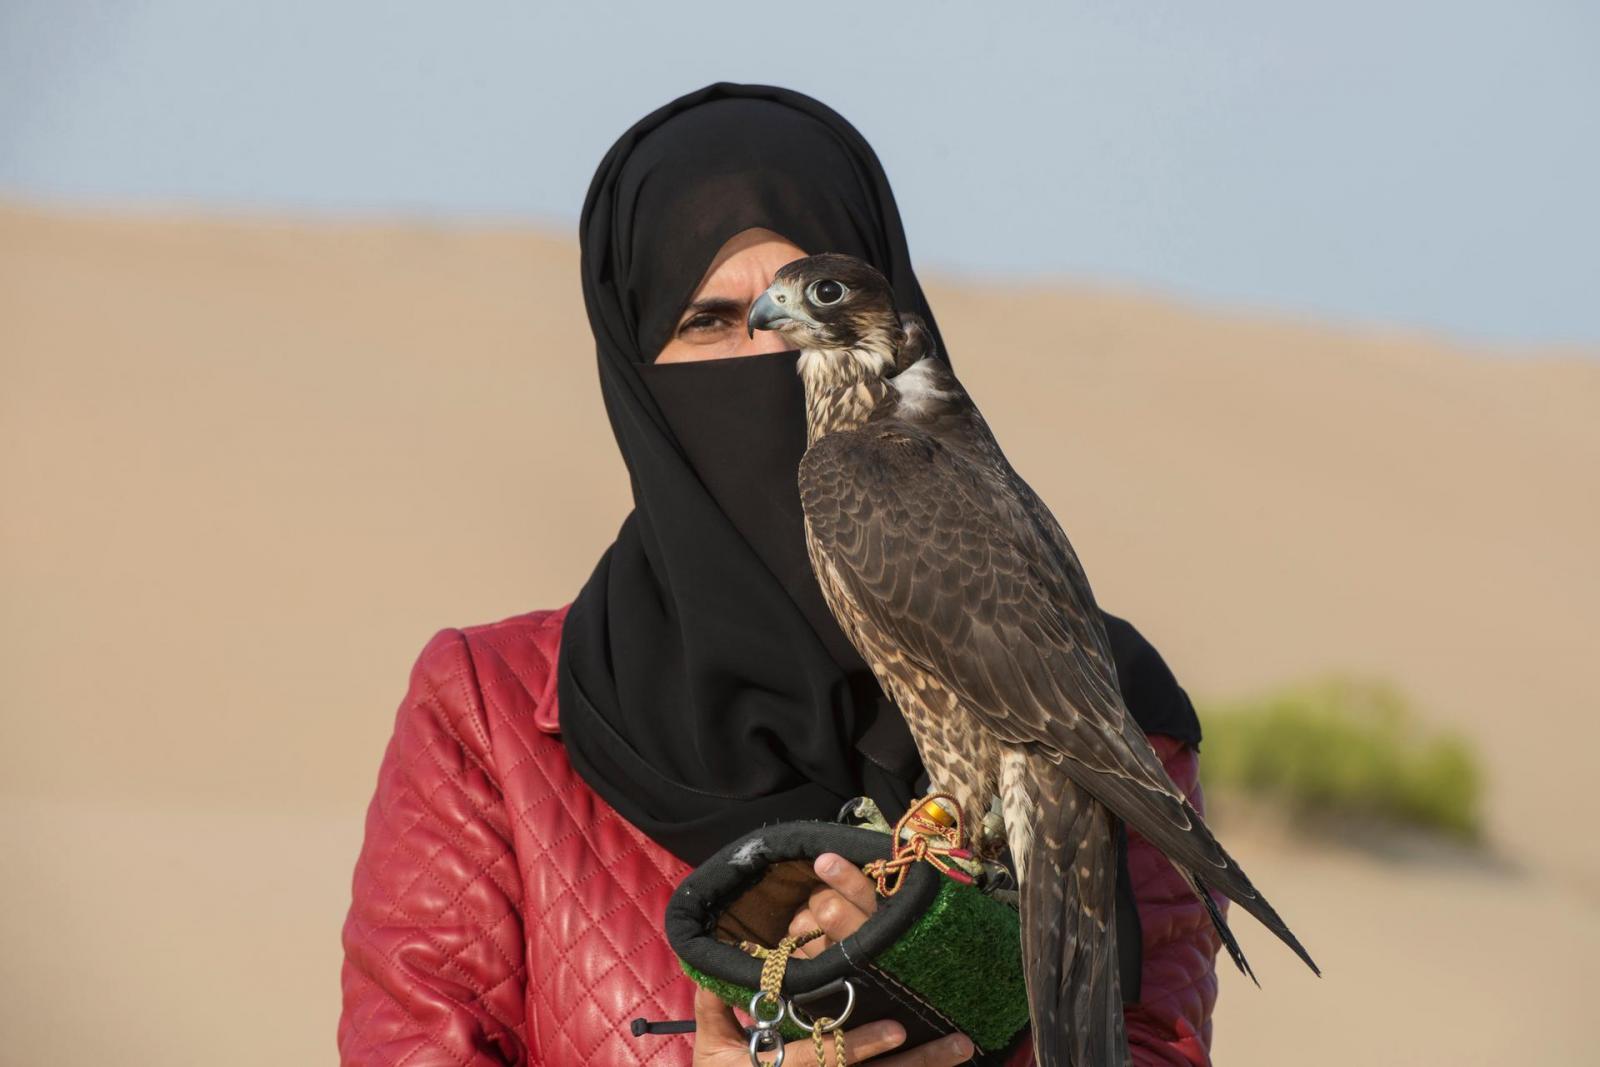 Breaking stereotypes - UAE Women Falconers-Published in The National